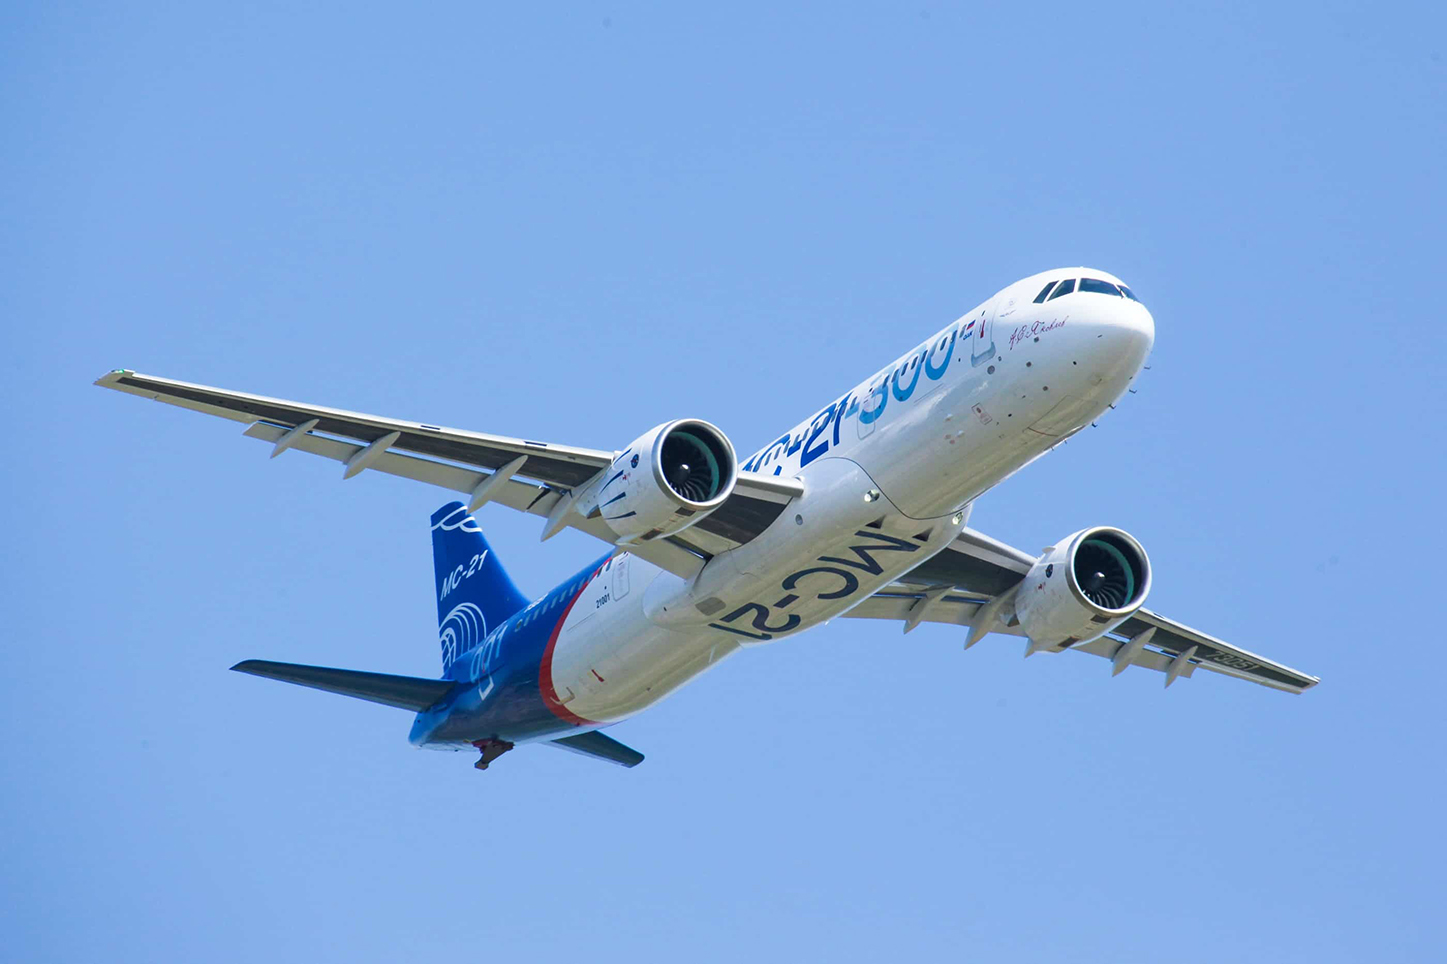 MC-21 aircraft performed flight with retracted landing gear